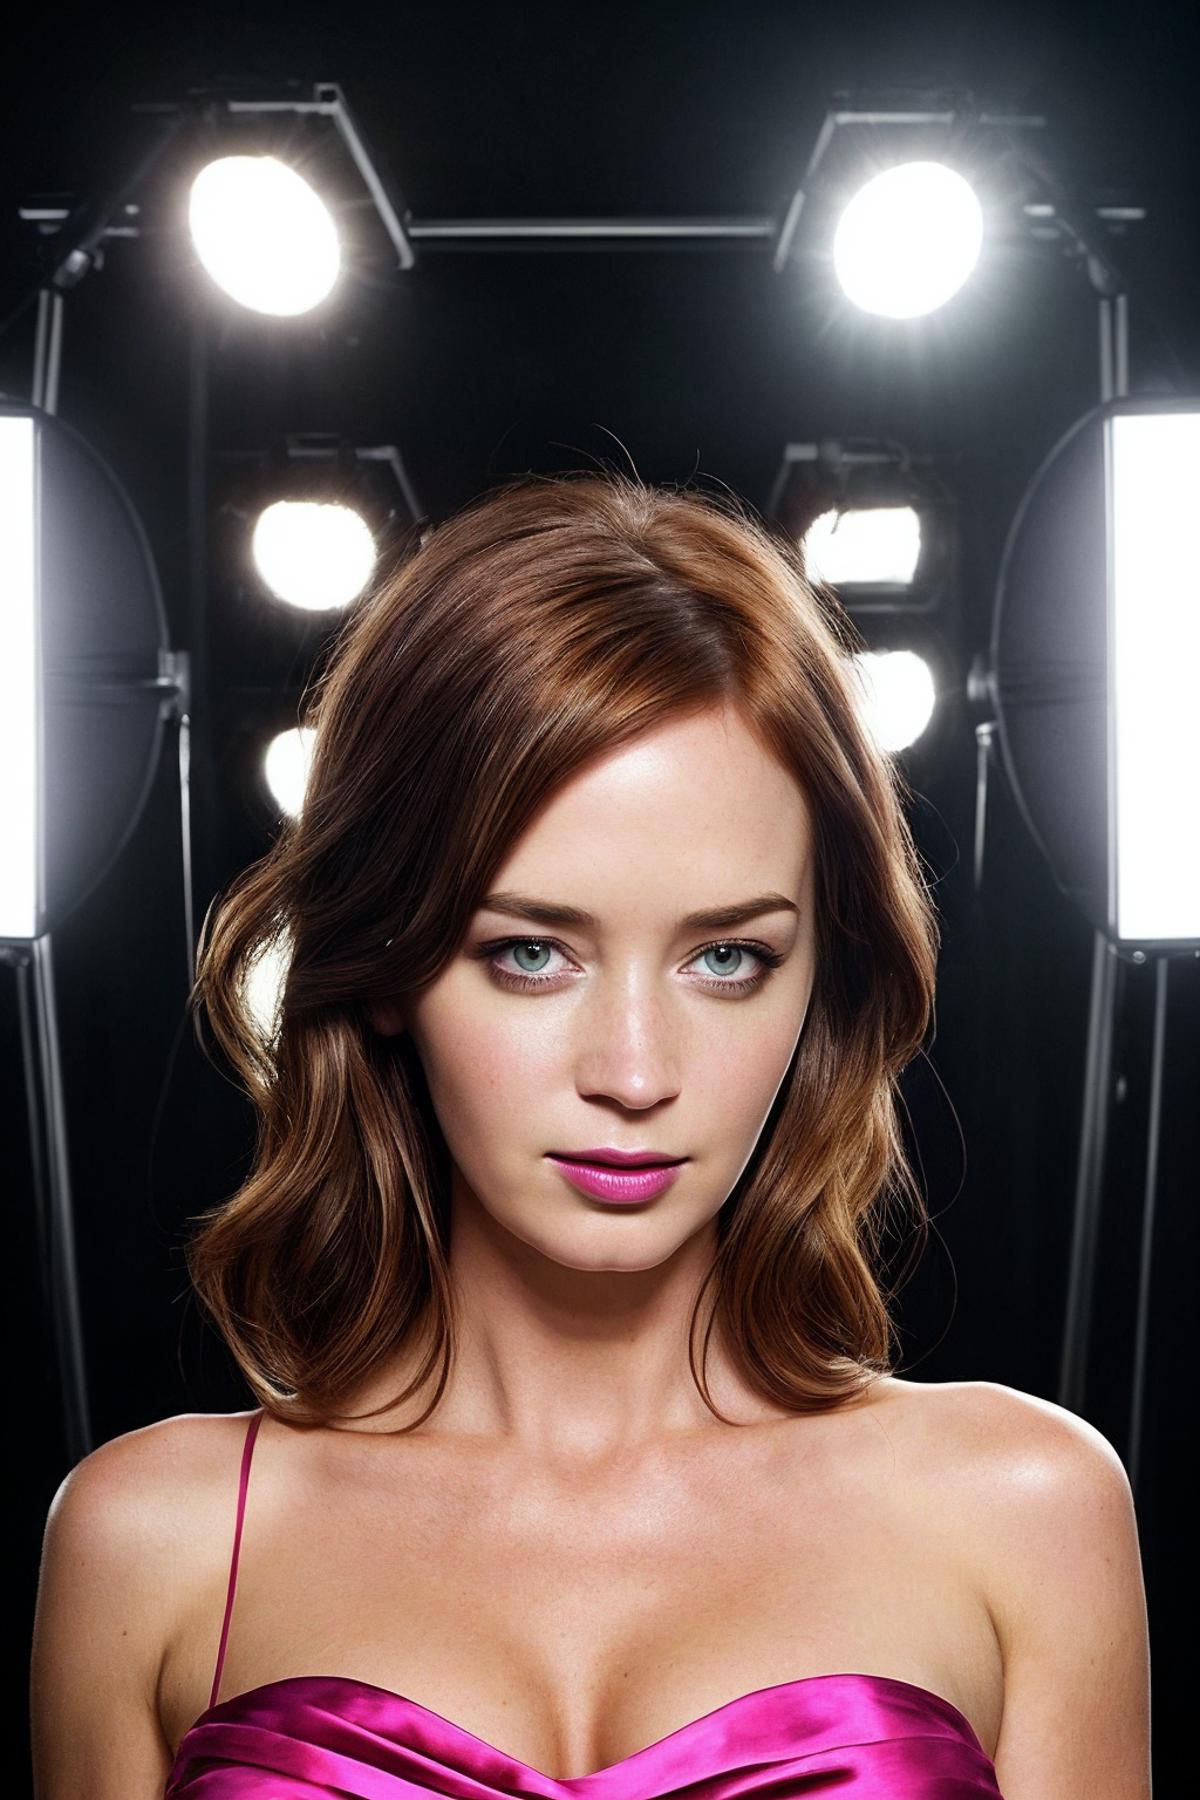 Emily Blunt image by solo_lee